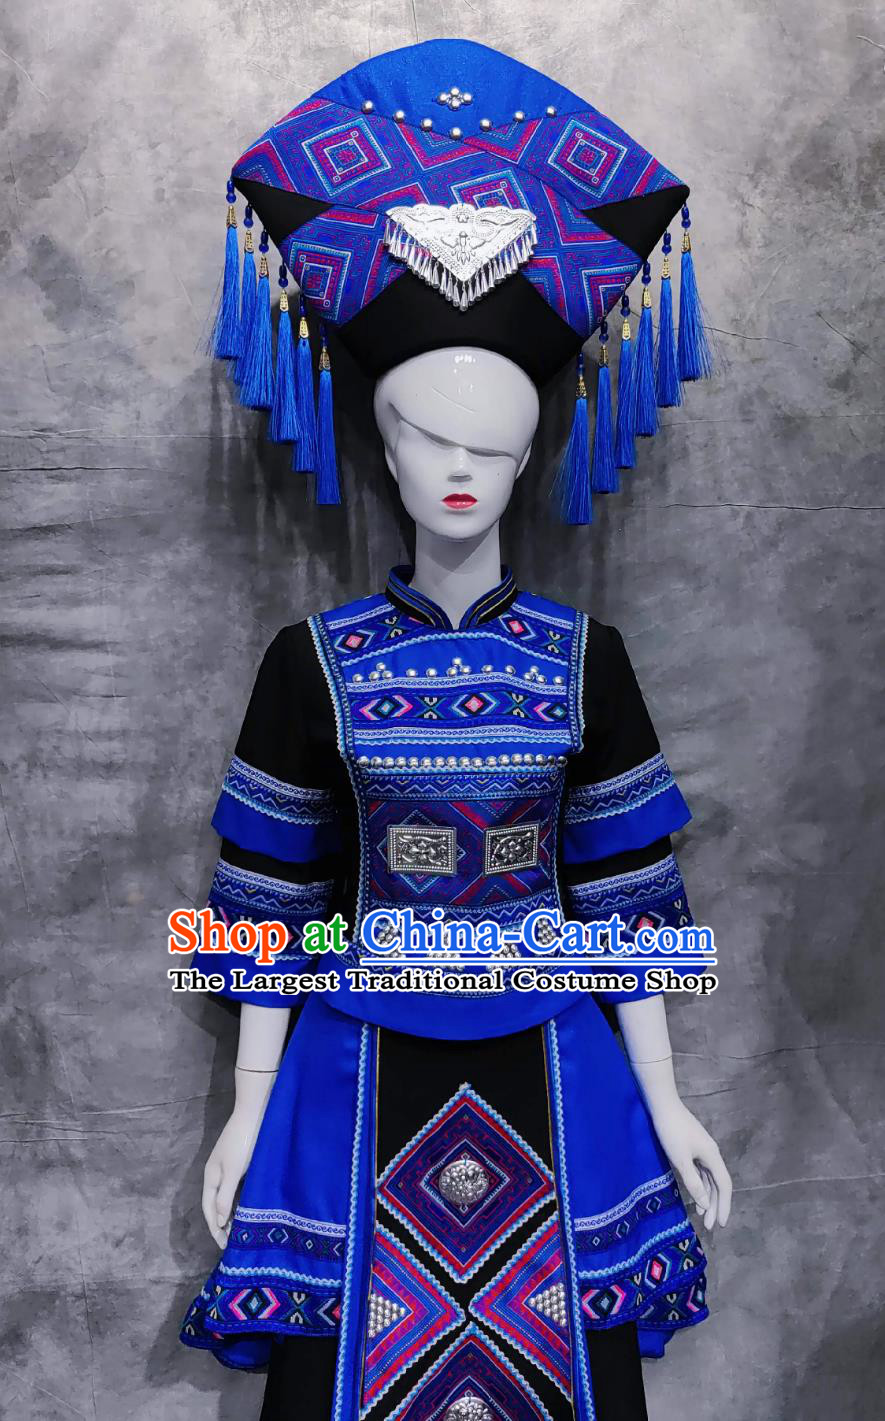 China National Minority Dance Dress Chinese Guangxi March rd Woman Solo Costume Zhuang Ethnic Festival Clothing